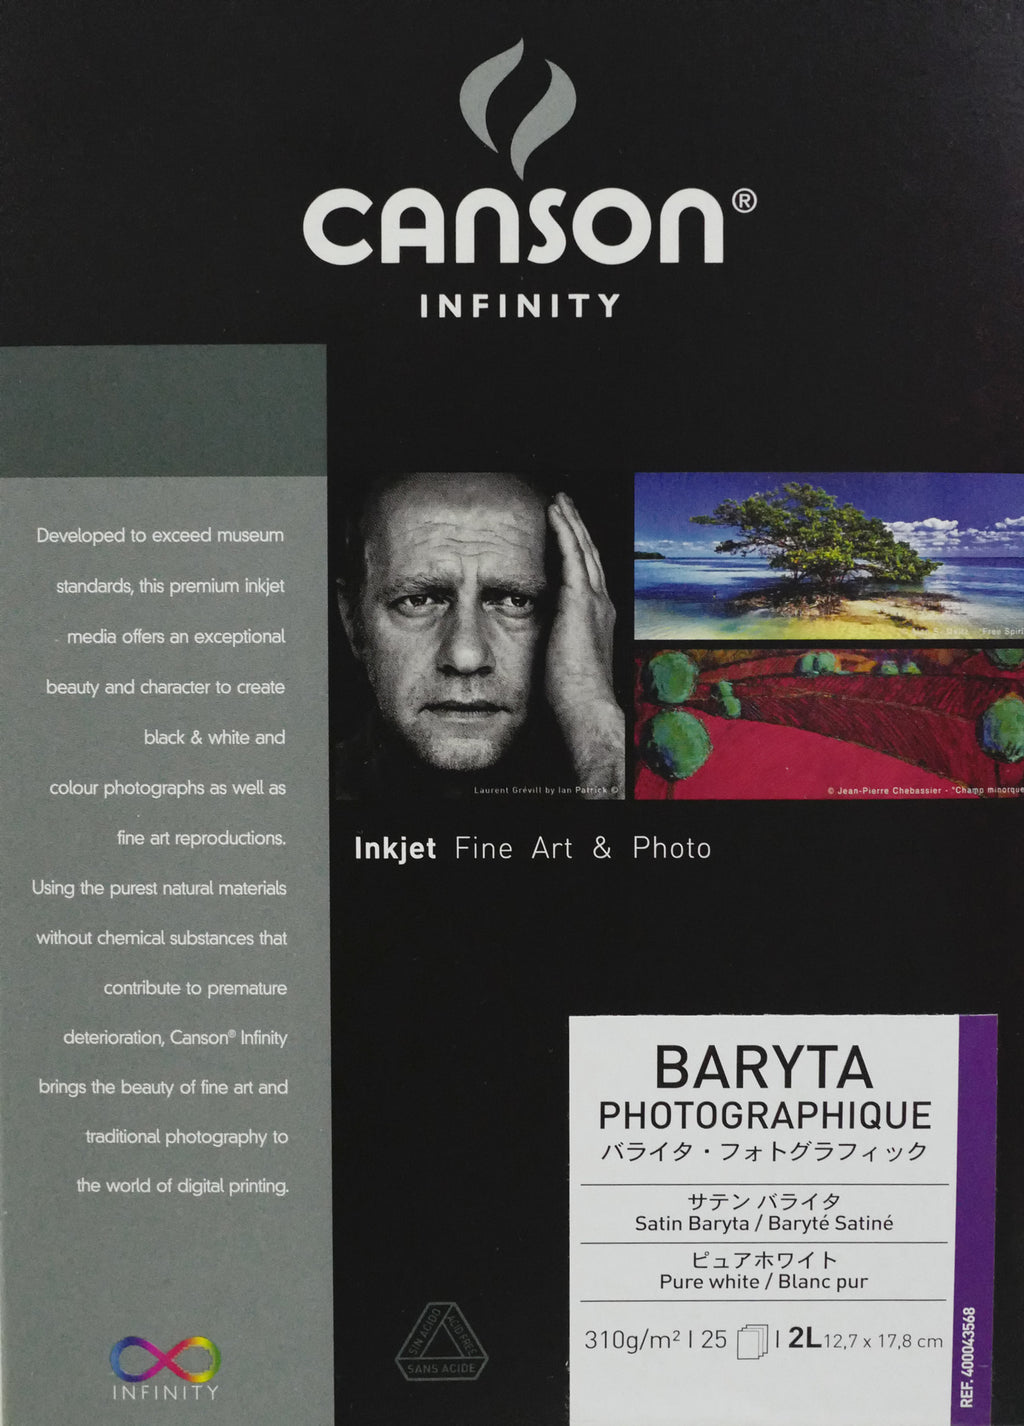 Canson Infinity Baryta Photographique - 310gsm - 5R - 25 sheets - Wall Your Photos